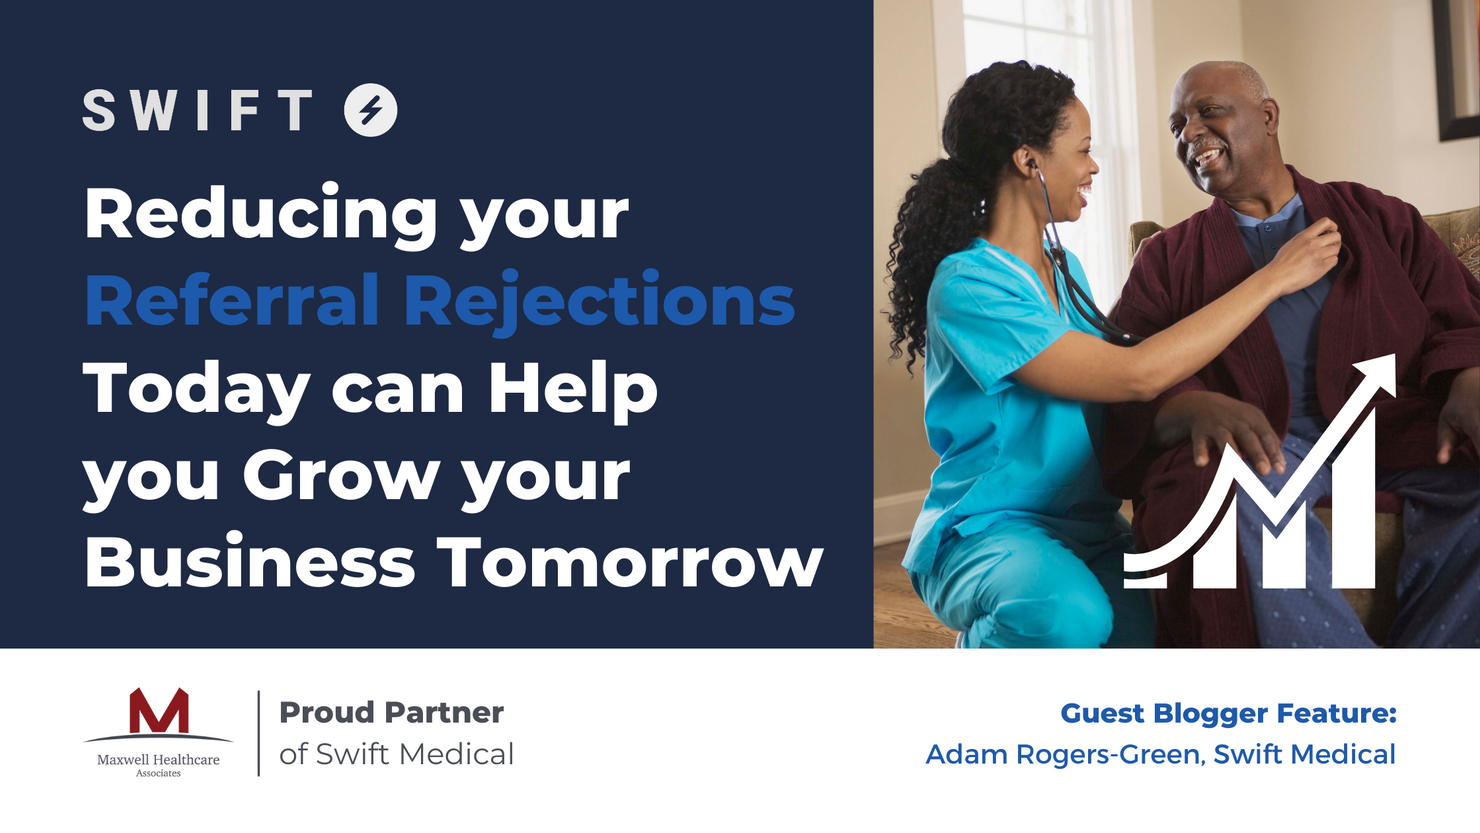 Reducing your Referral Rejections Today can Help you Grow your Business Tomorrow